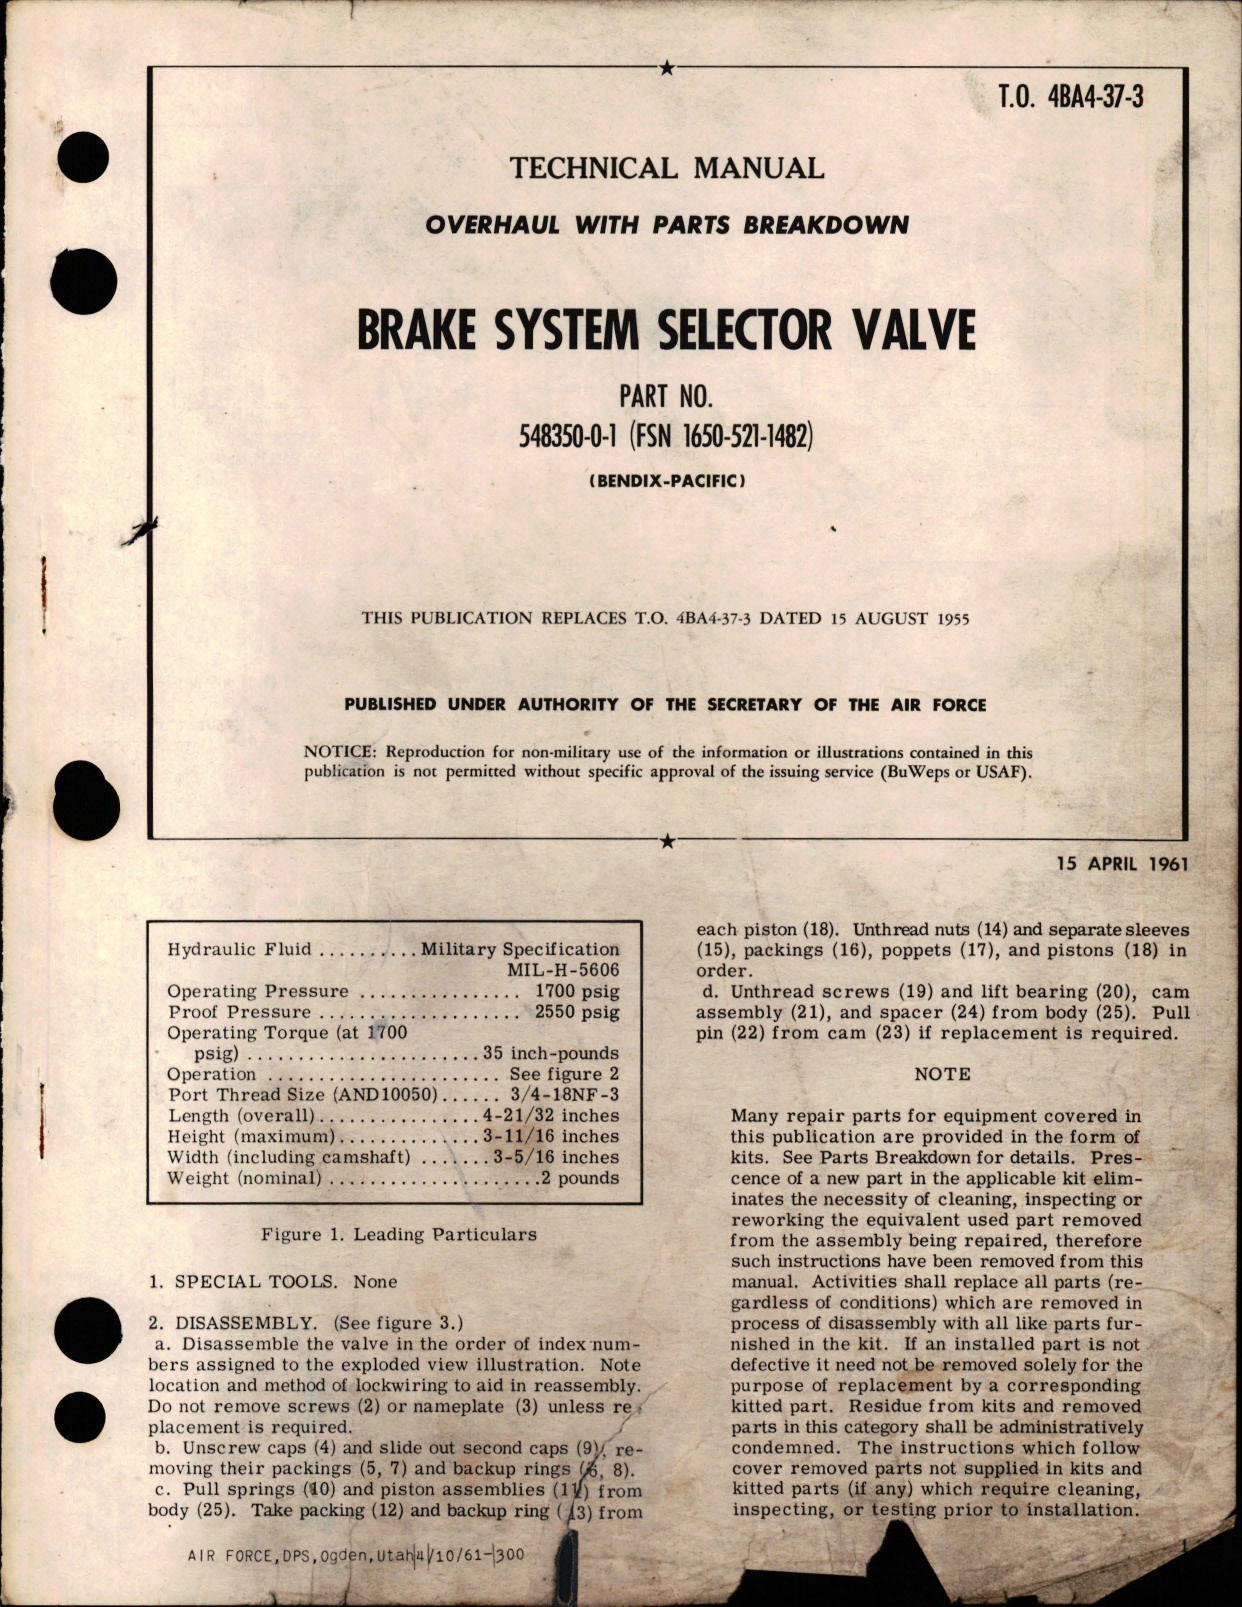 Sample page 1 from AirCorps Library document: Overhaul with Parts Breakdown for Brake System Selector Valve - Part 548350-0-1 